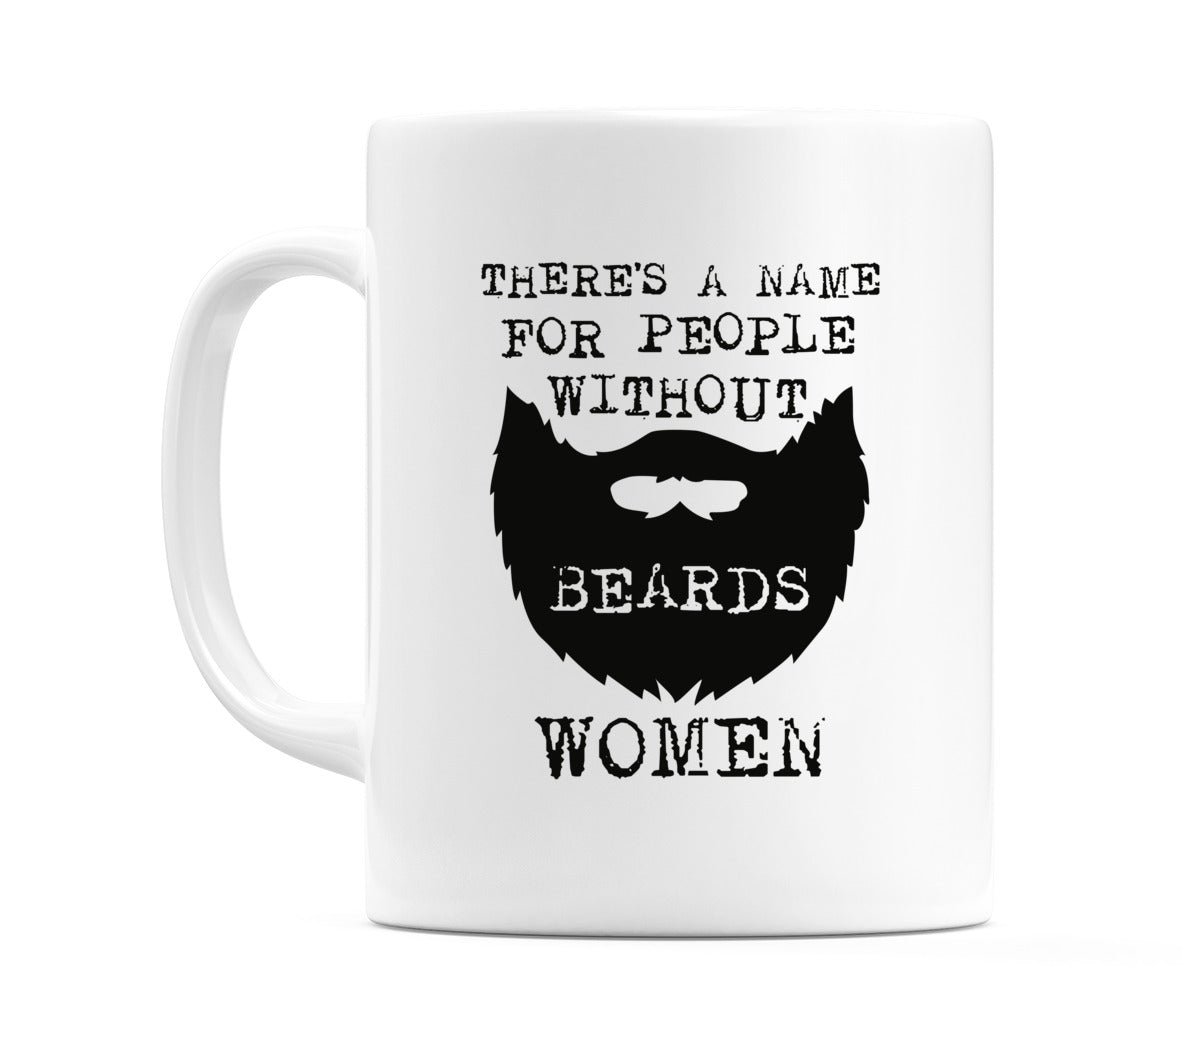 There's a Name For People Without Beards Women Mug